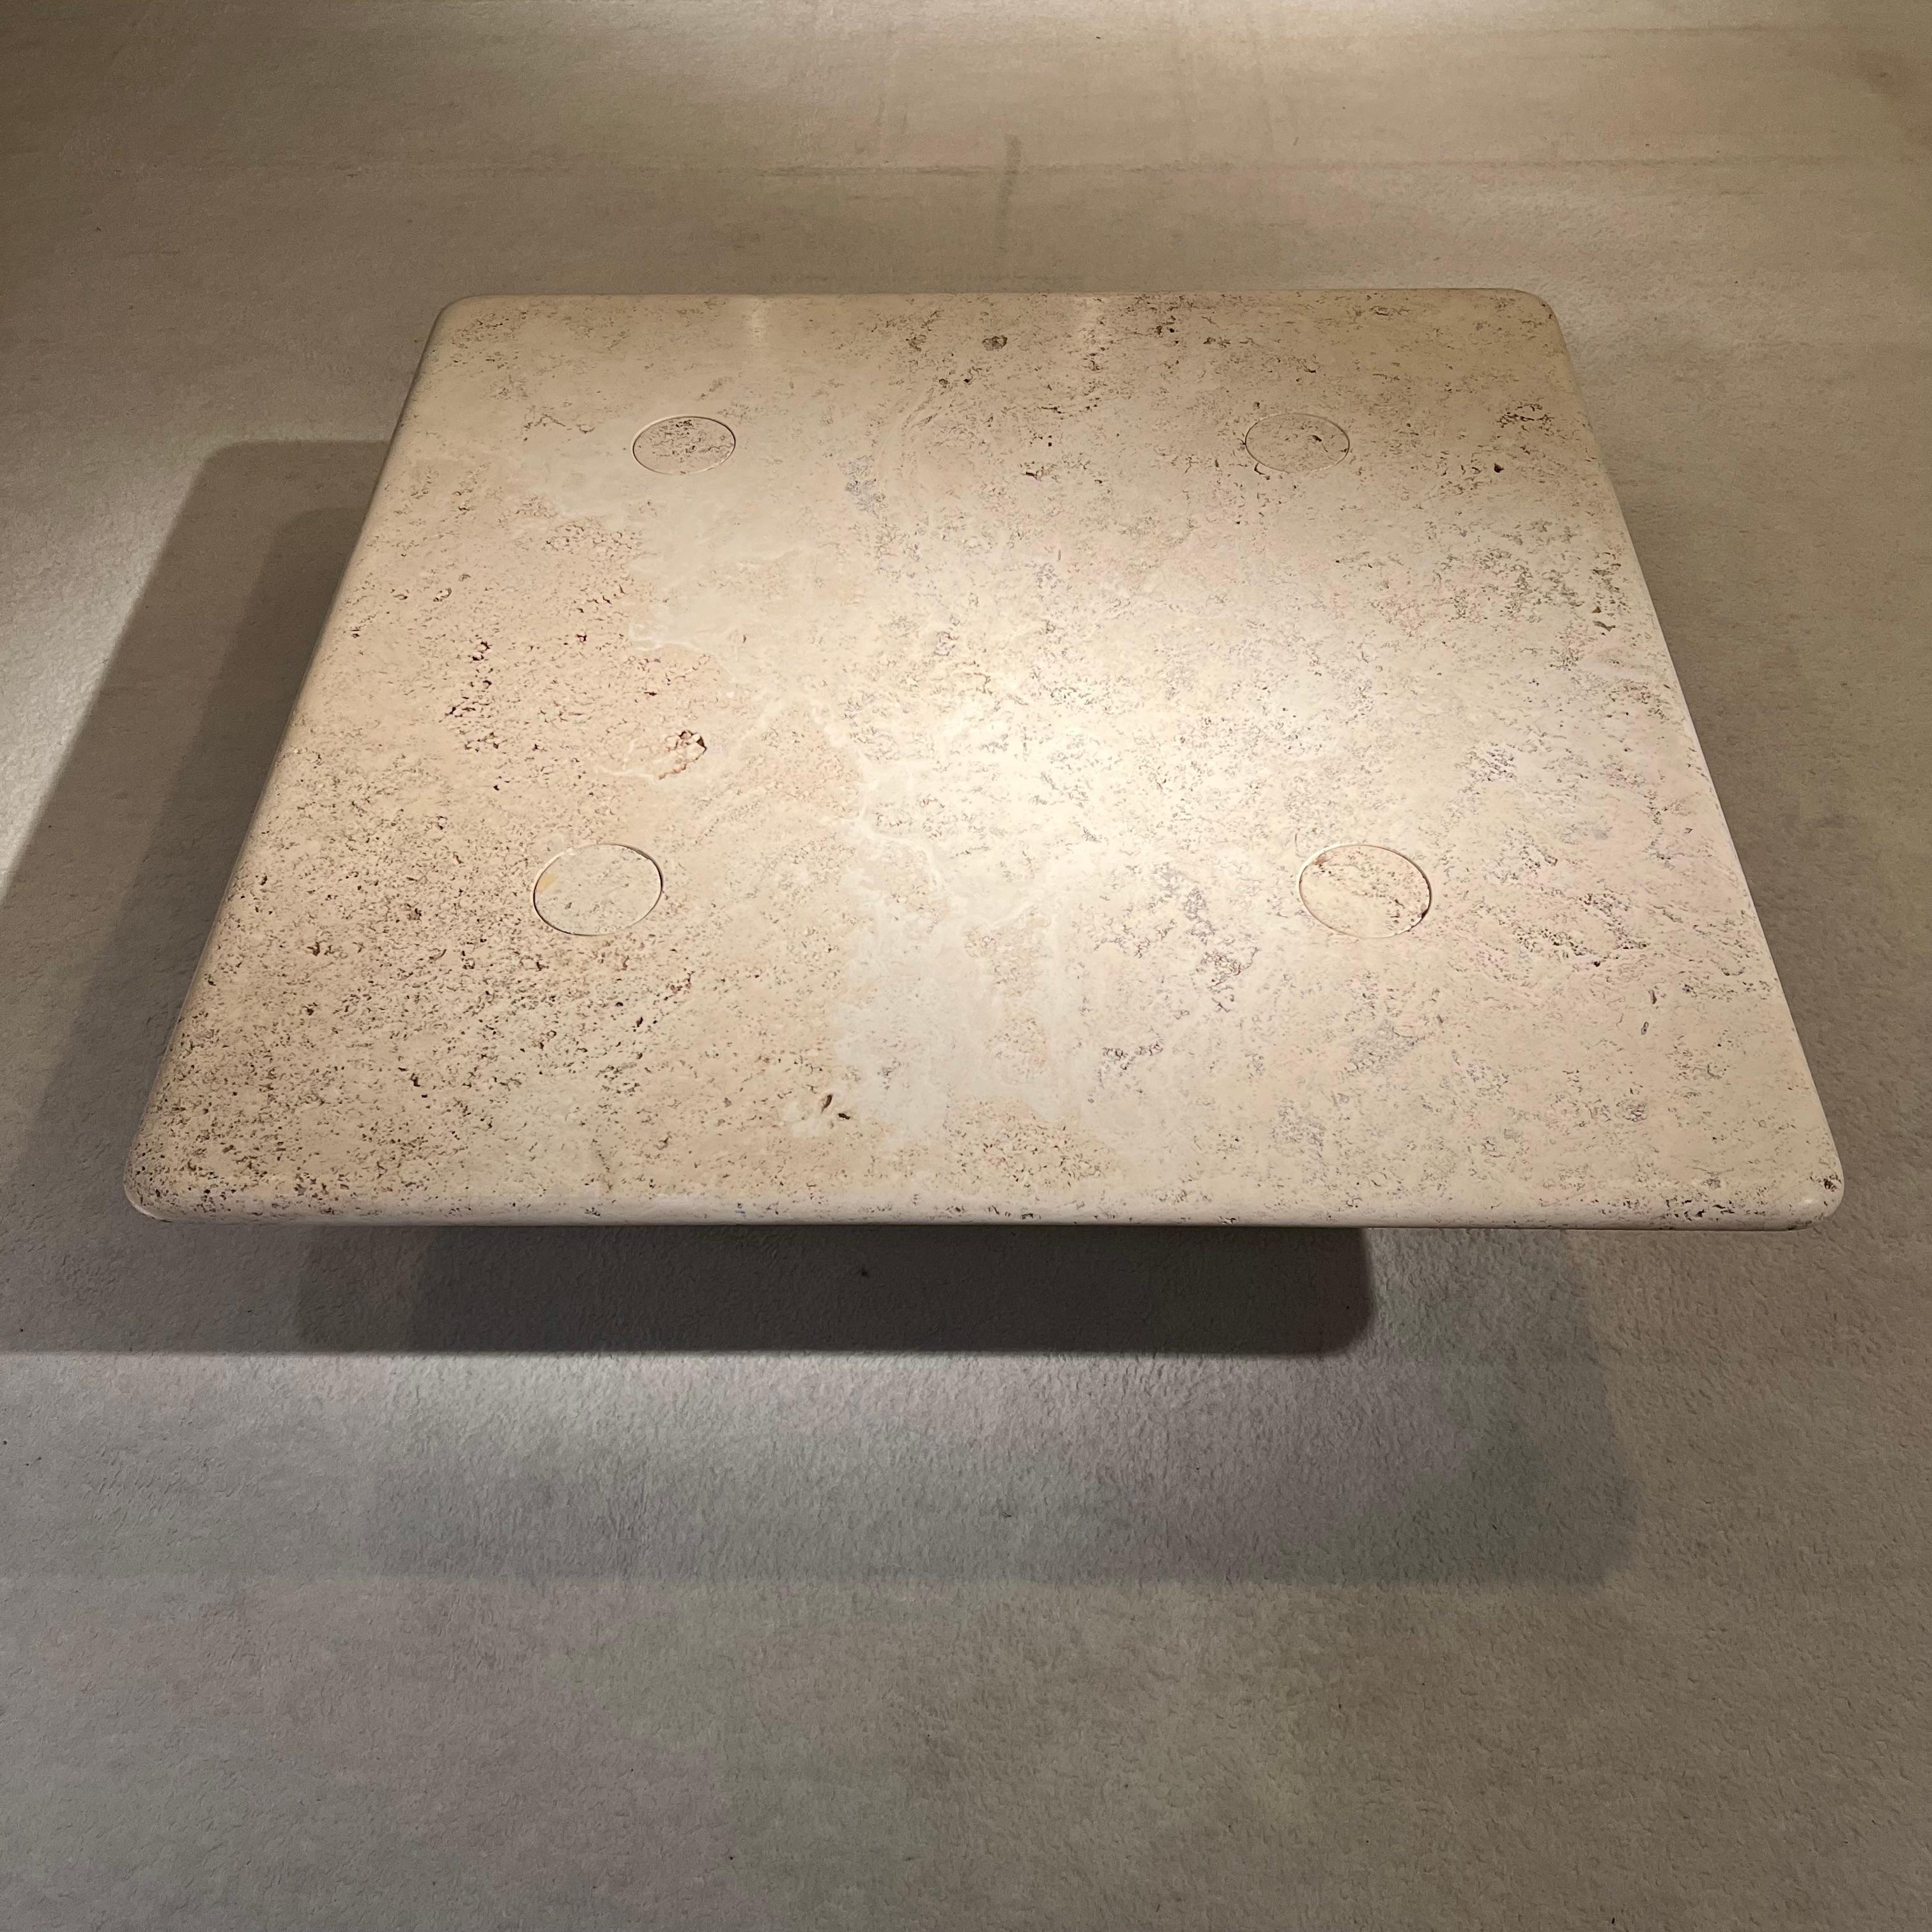 This superb travertine table is the work of Angelo Mangiarotti, an Italian designer of the 1970s.
The table's superb patina, streamlined shape and ideal dimensions make it a softly chic decorative object. 
A timeless model typical of the period and